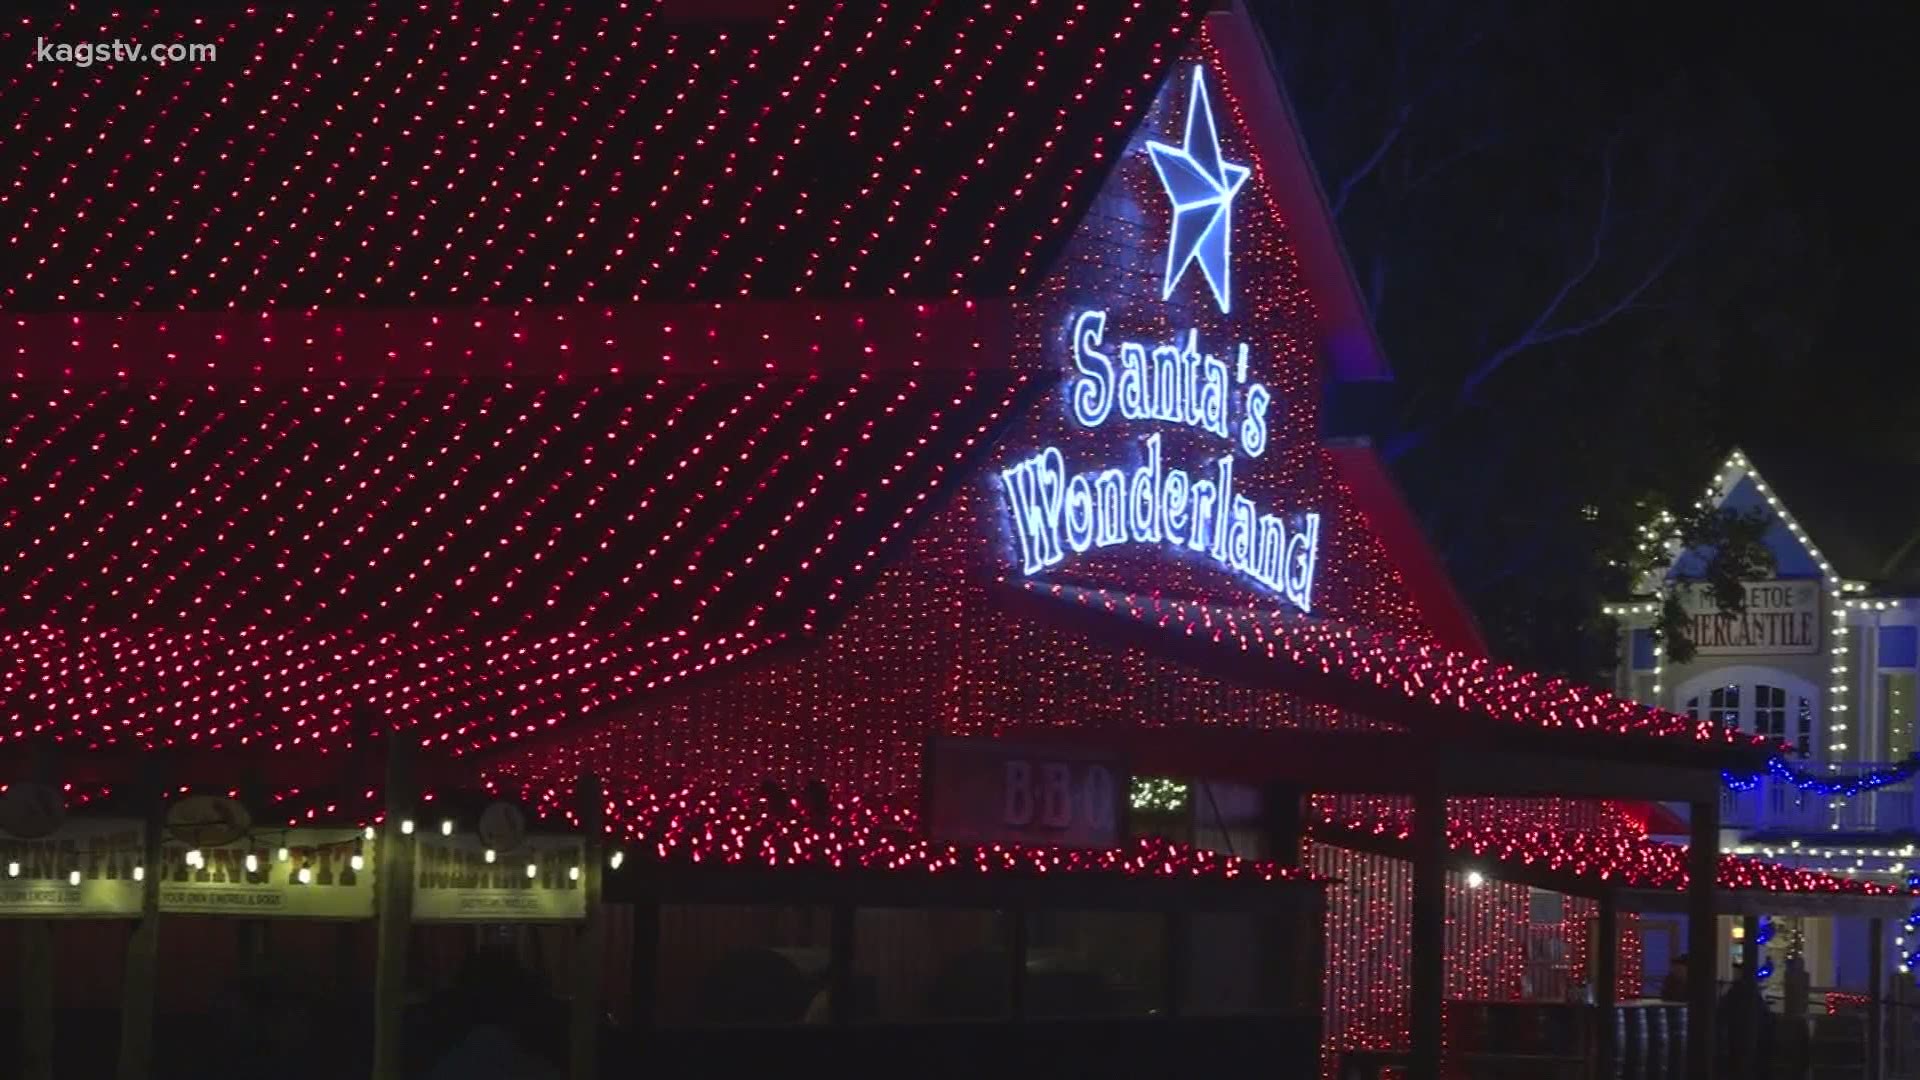 Visit College Station and Santa's Wonderland have announced a new partnership to extend out-of-town guests' stay in the area.